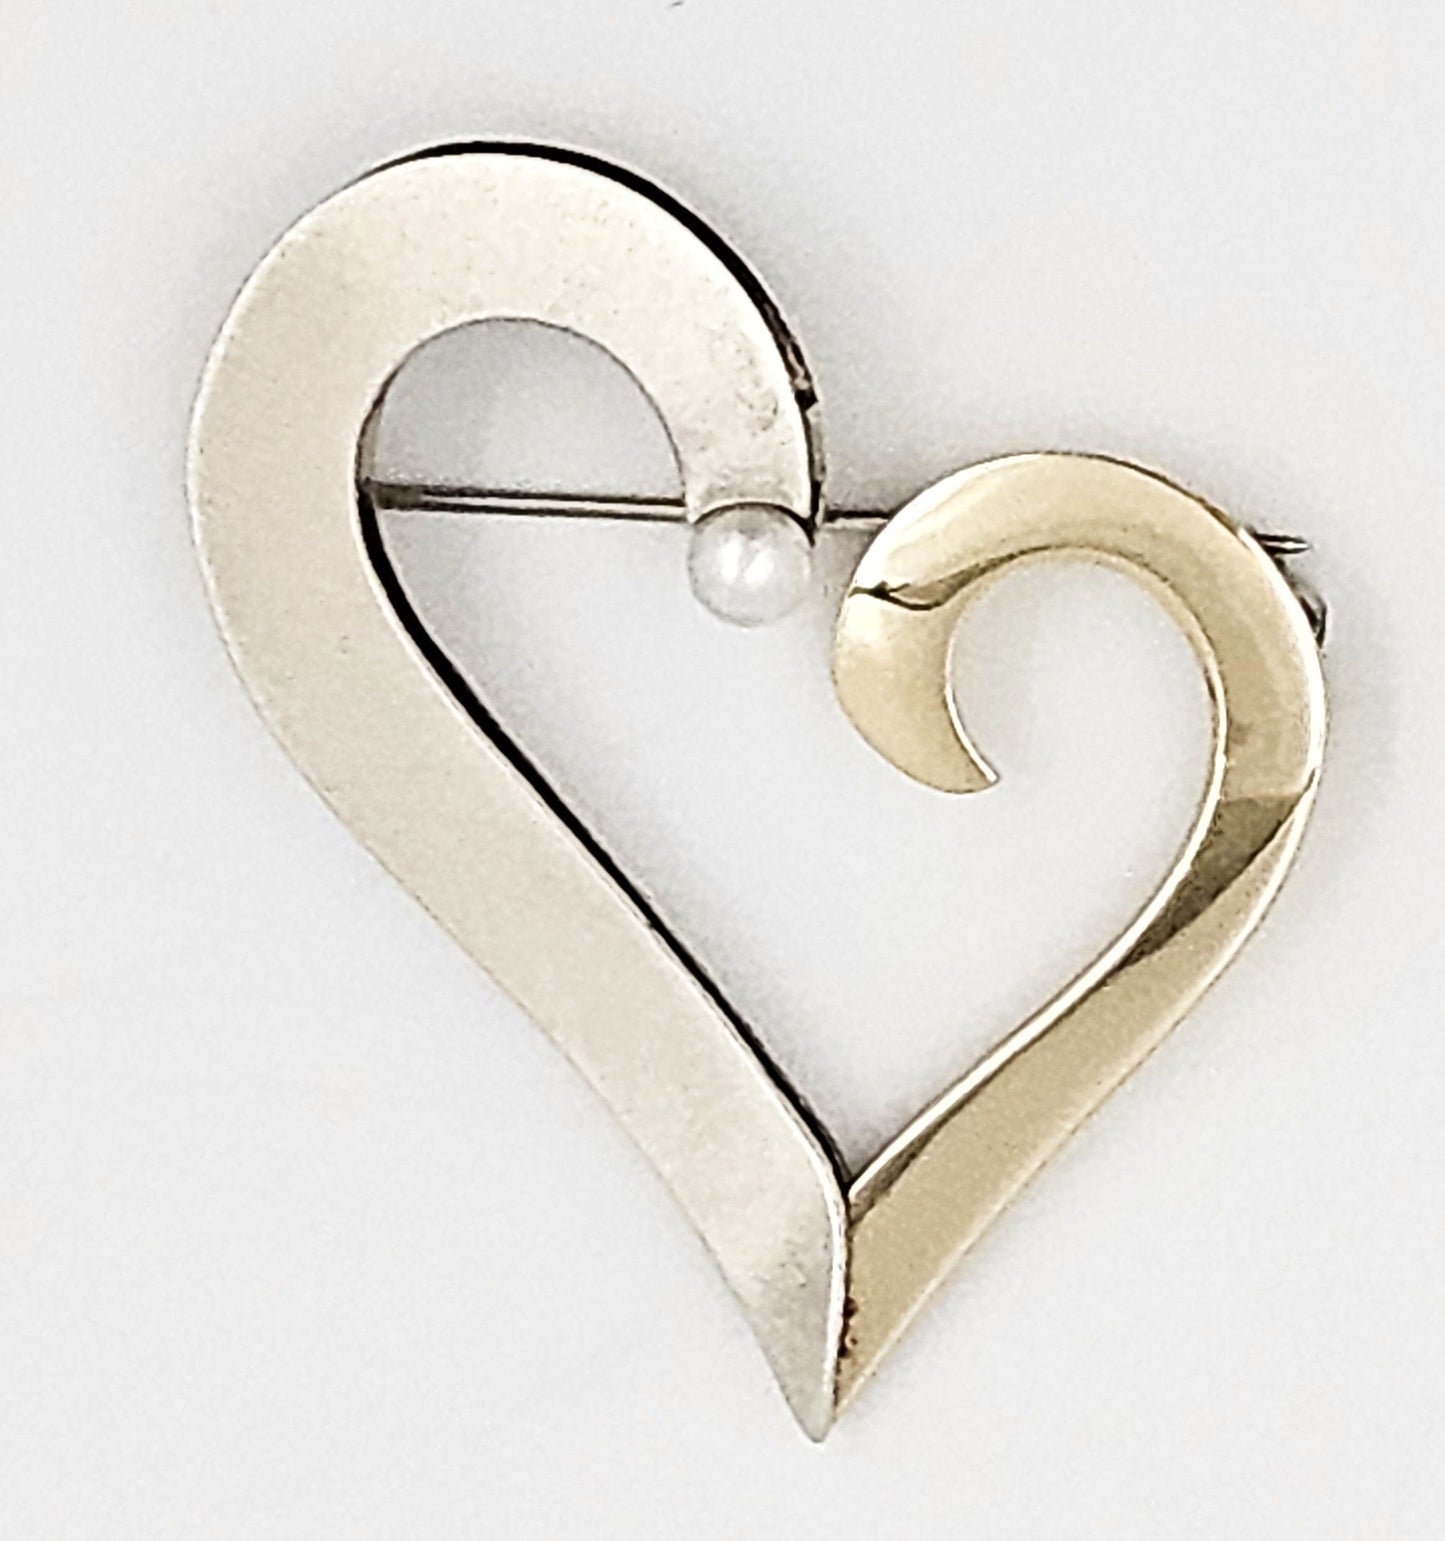 B Levy Jewelry Superb Artisan Signed B Levy Sterling 14k Gold & Pearl Modernist Heart Brooch